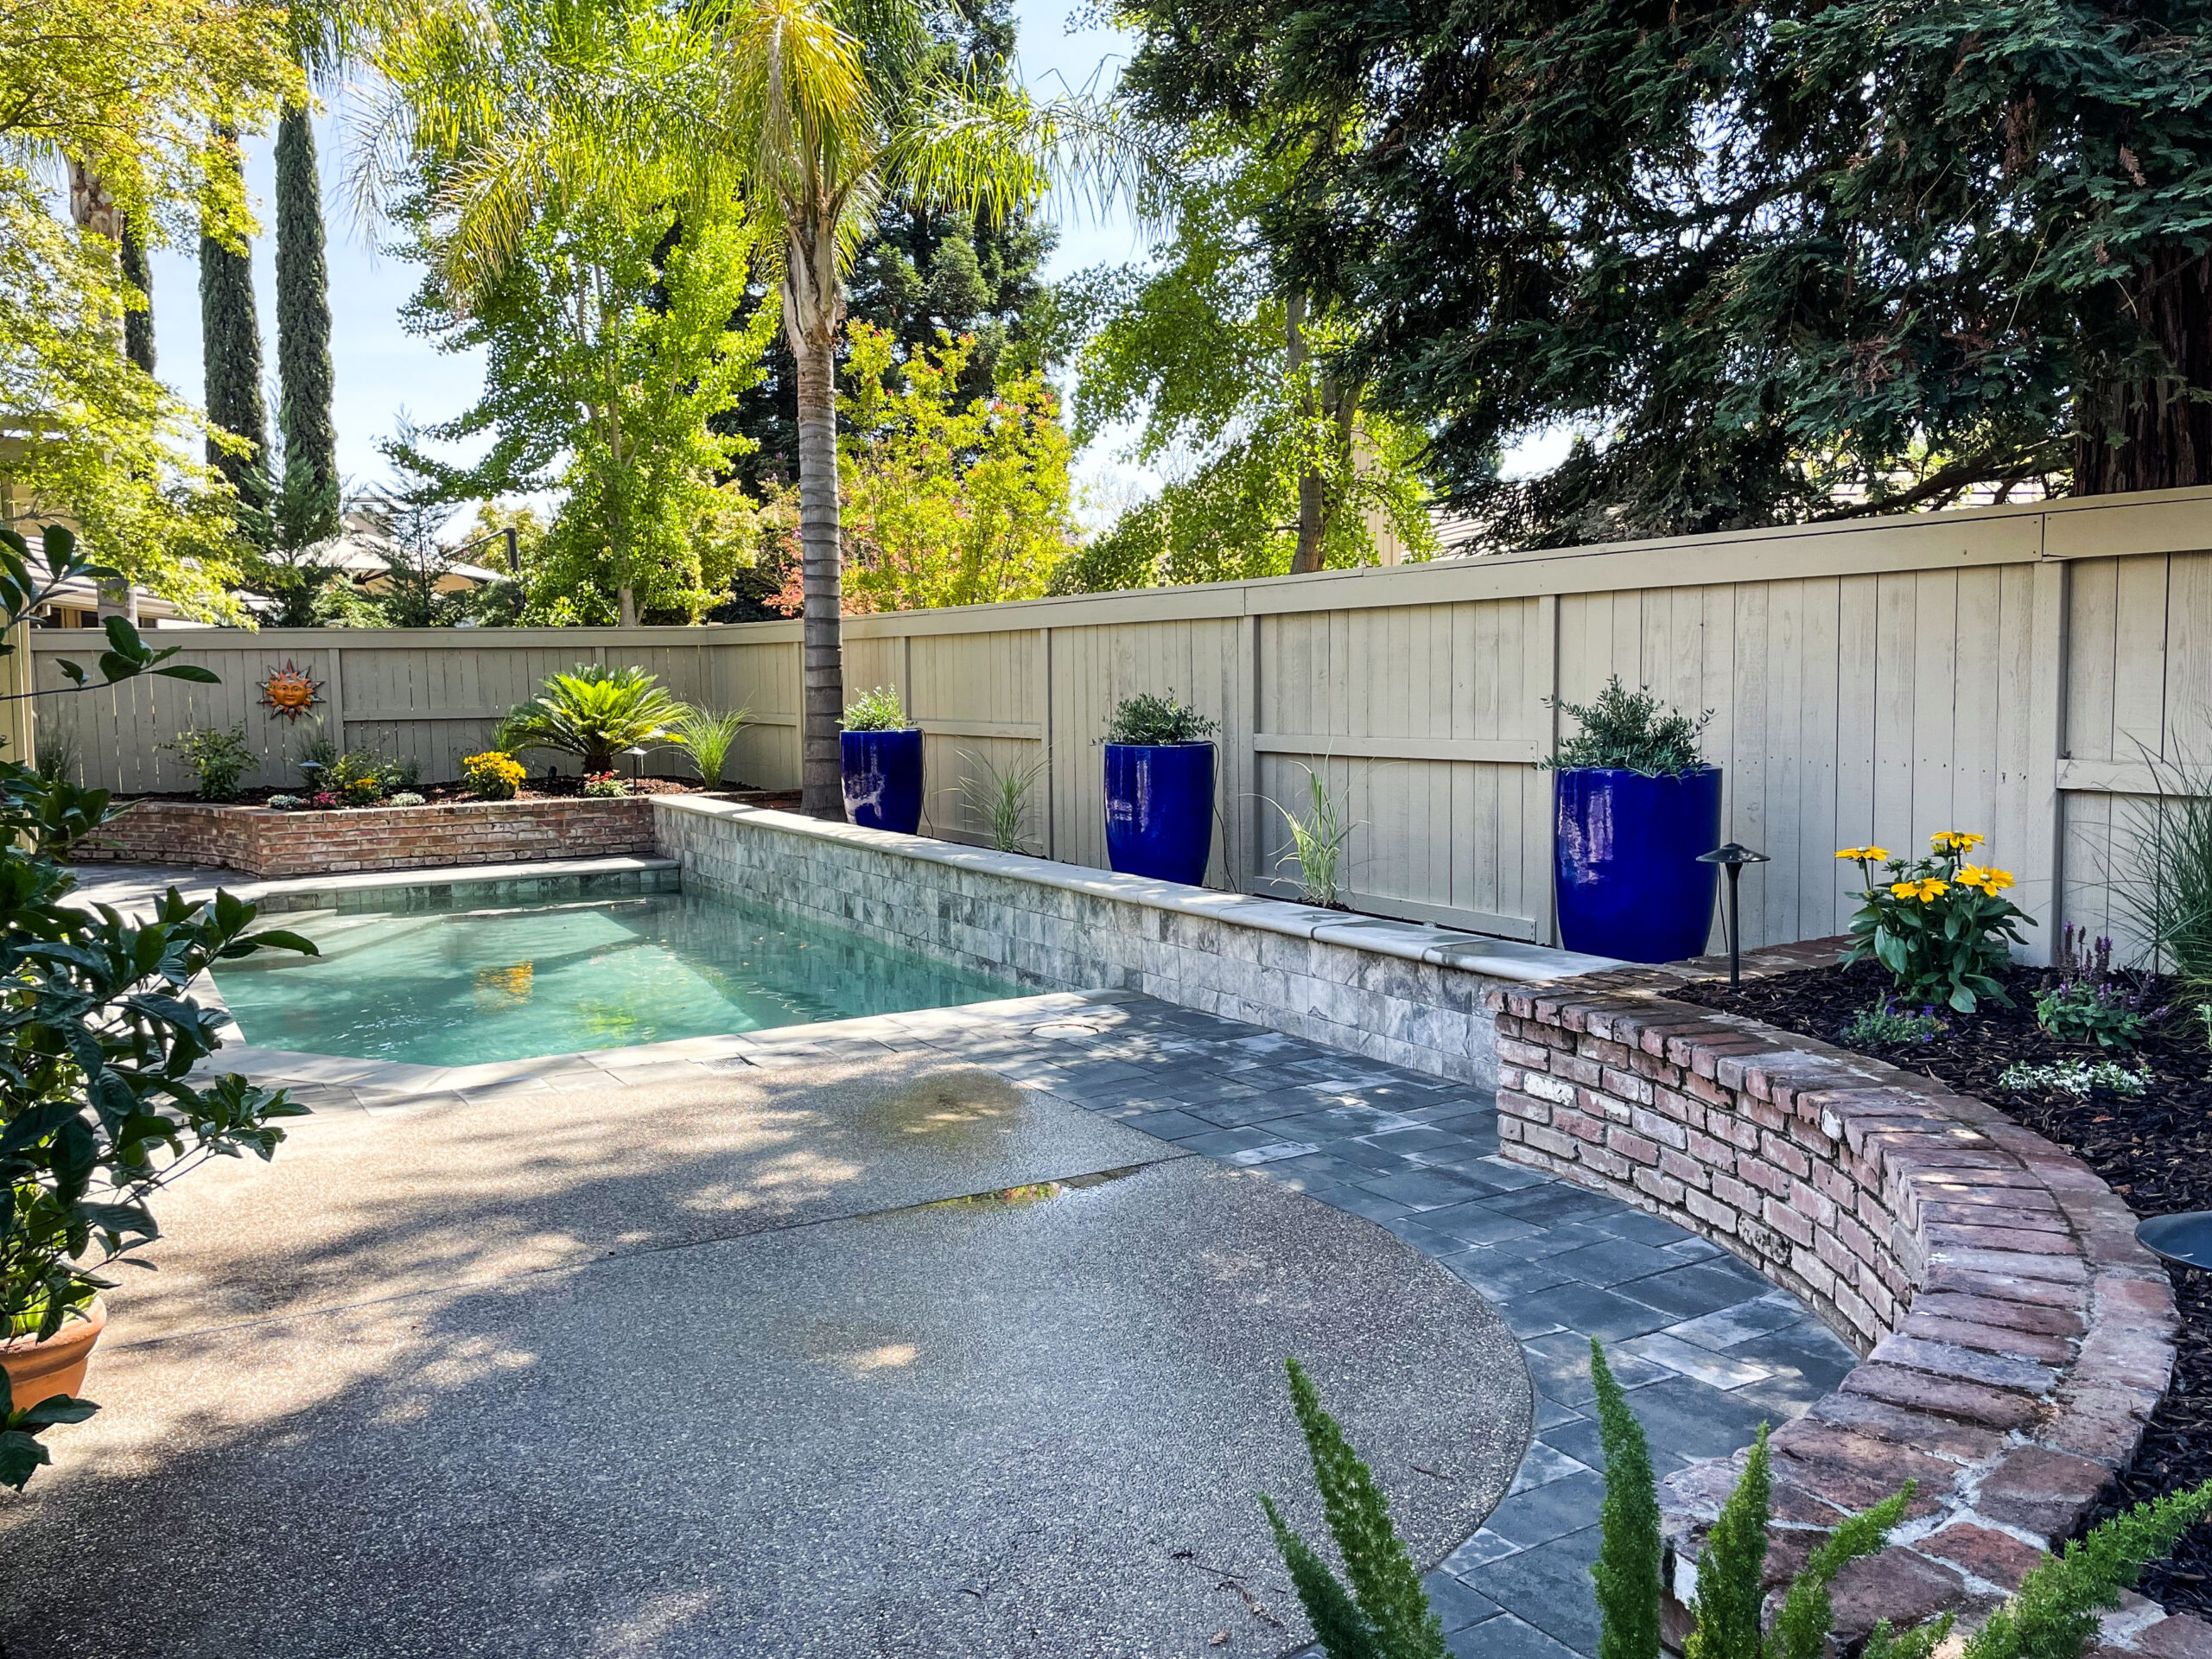 Backyard view of painted fence lined with planted cobalt blue pots, smooth new pavers surrounding pool.